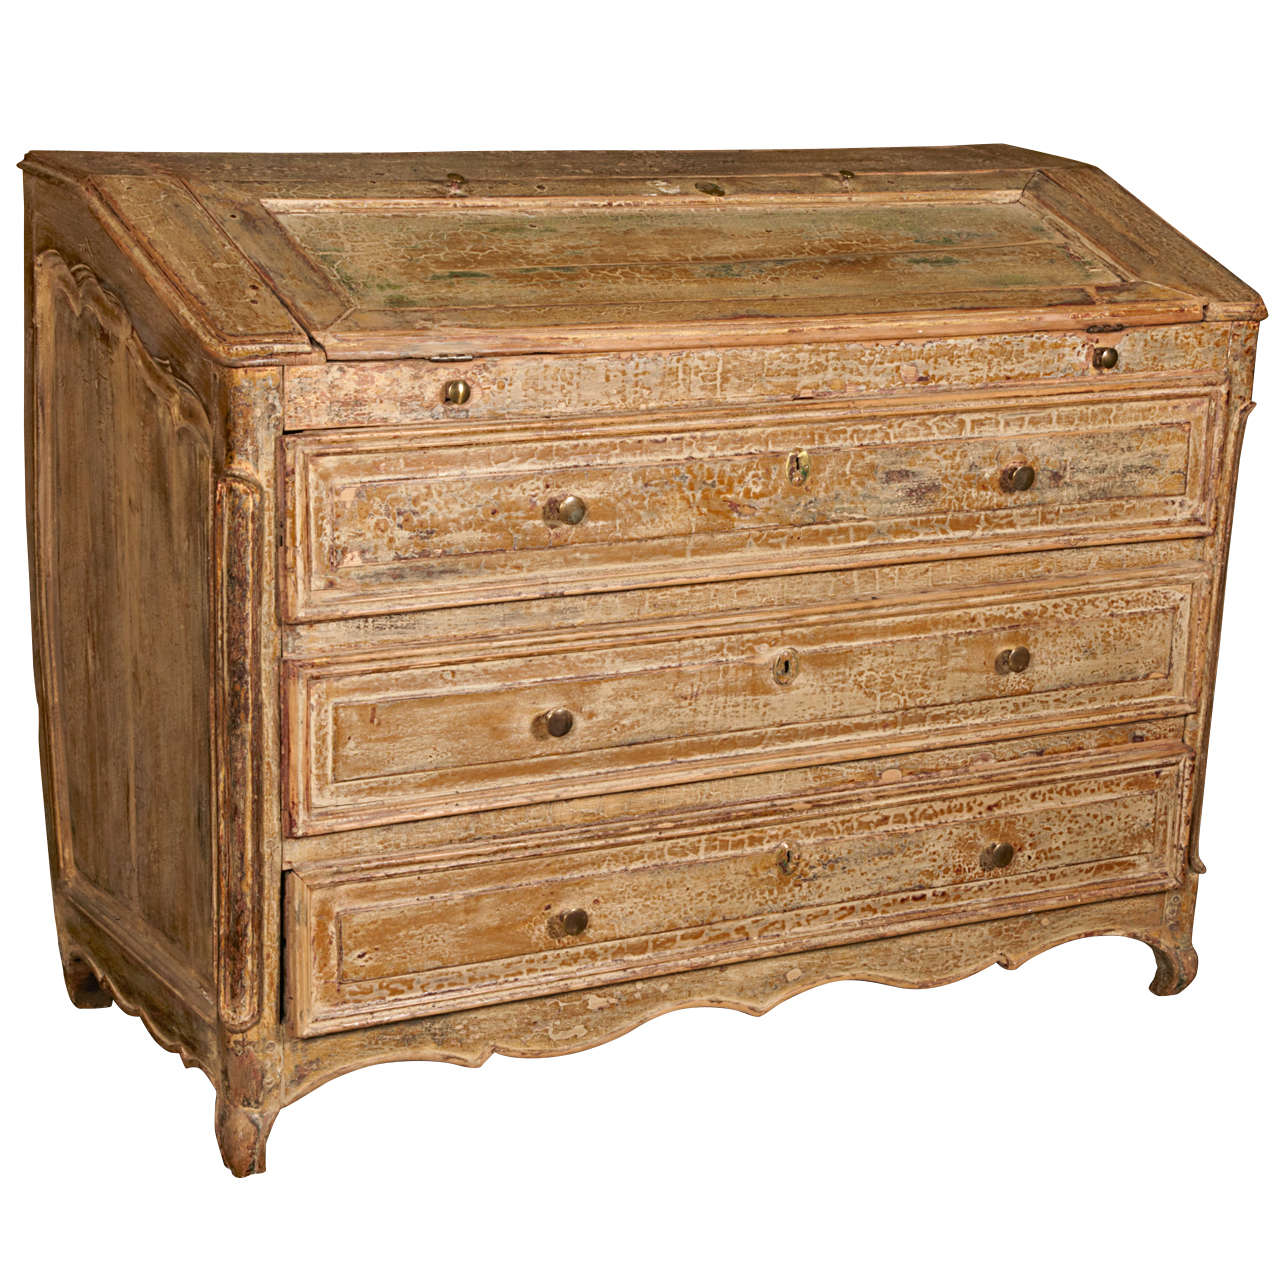 18th Century Chest of Drawers with Folding Desk Top